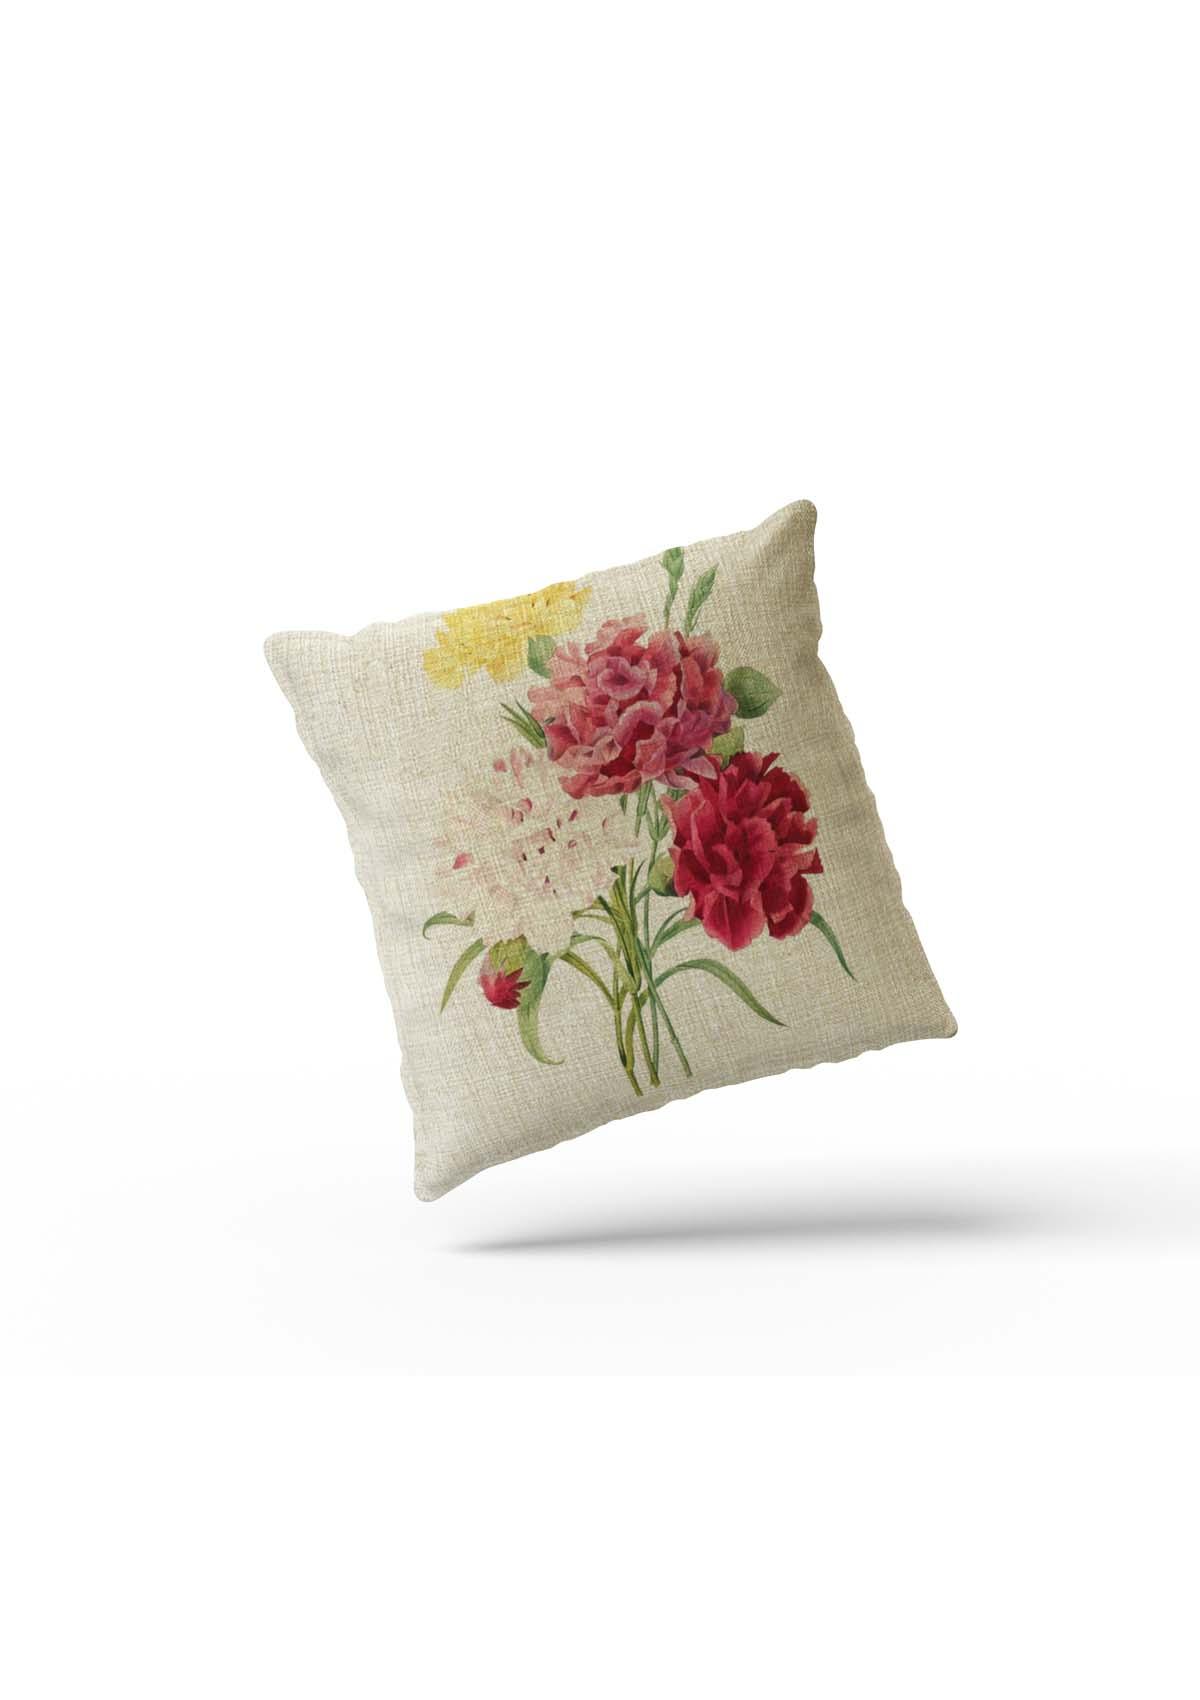 Flower Print "Blossom Haven" Cushion Covers